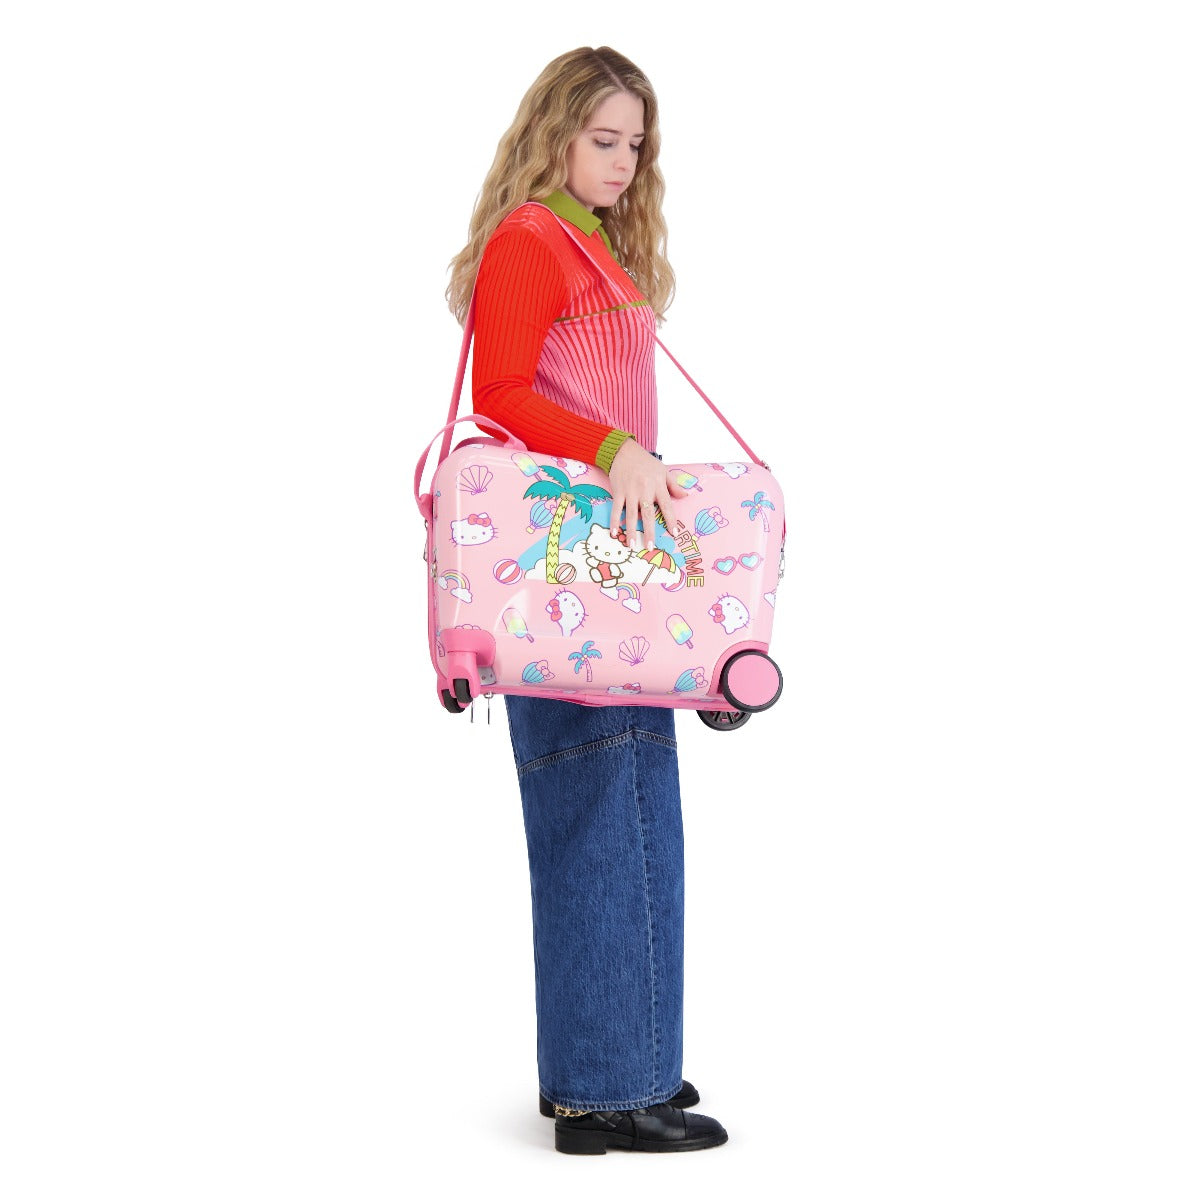 Pink Hello Kitty Summertime Ride-on 14.5 inch carry-on spinner suitcase rolling luggage for kids travel